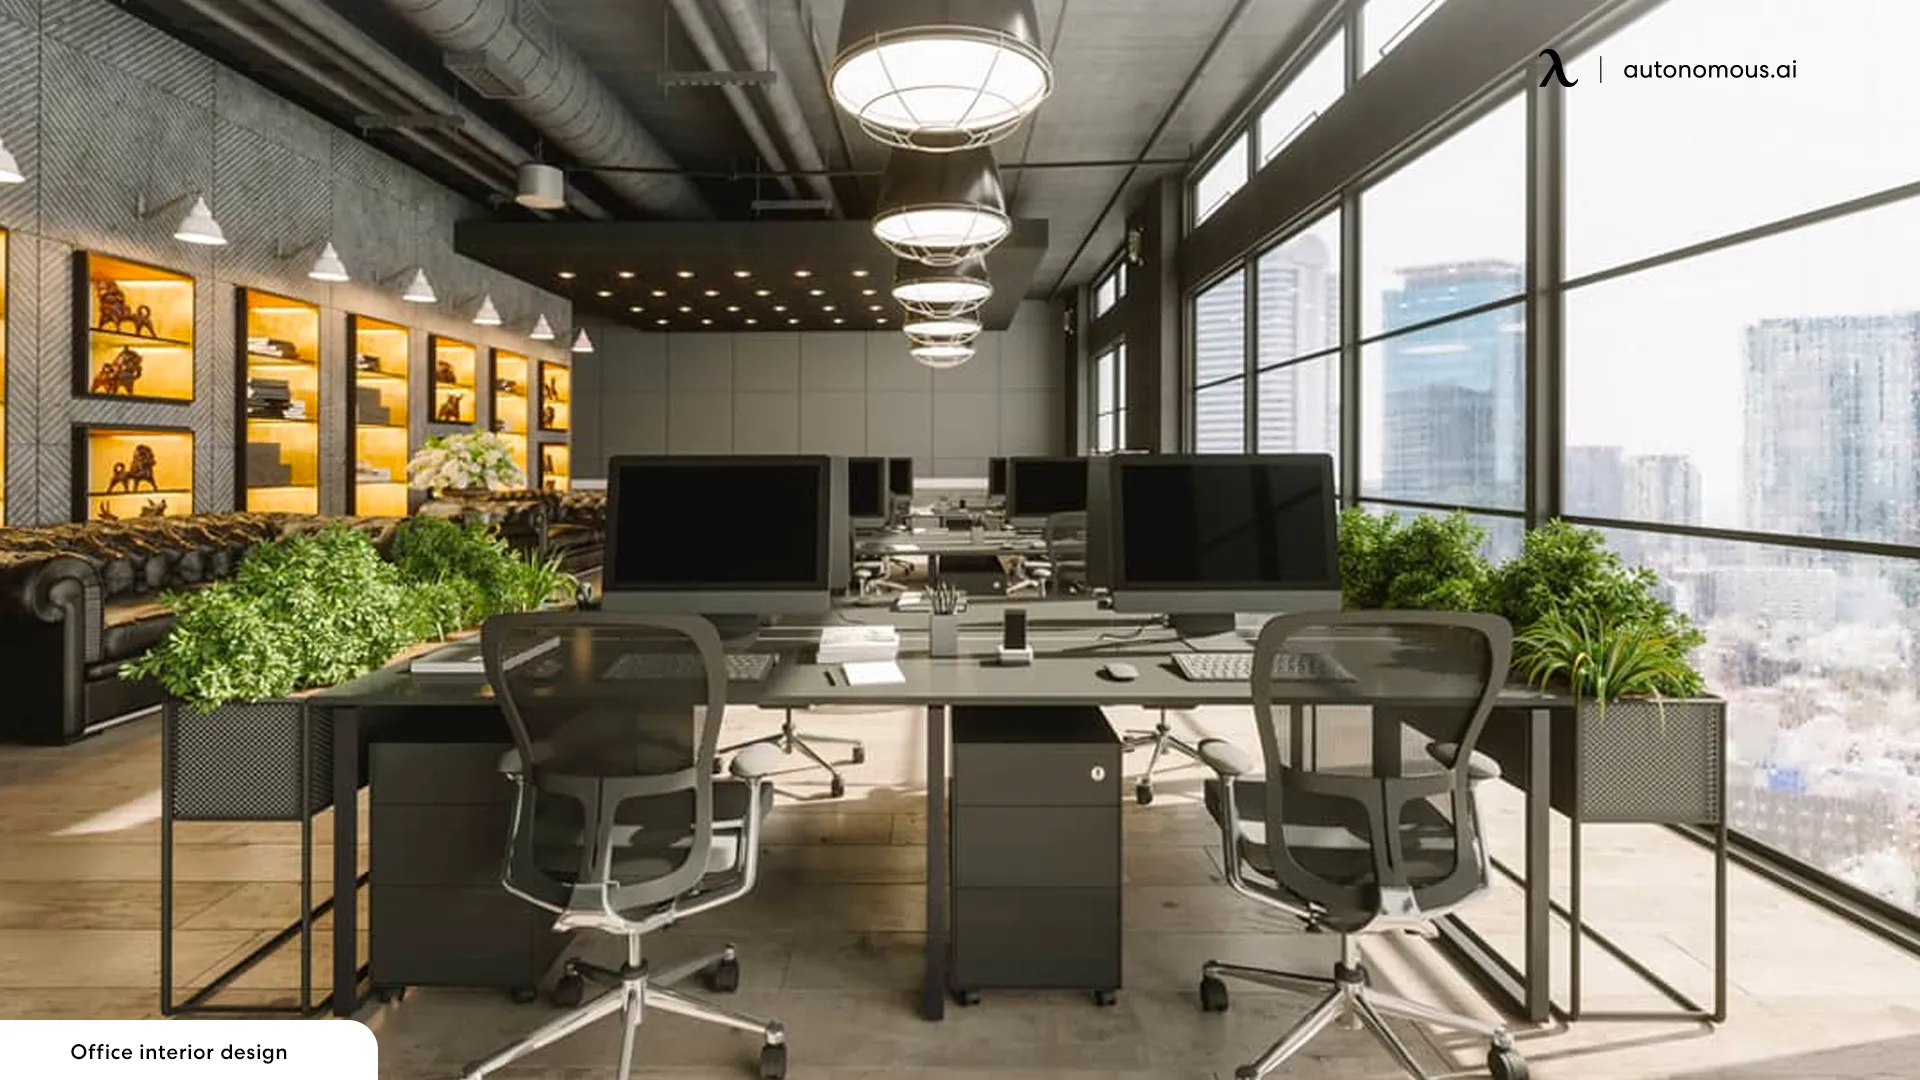 Natural Lighting and Green Spaces - office amenities